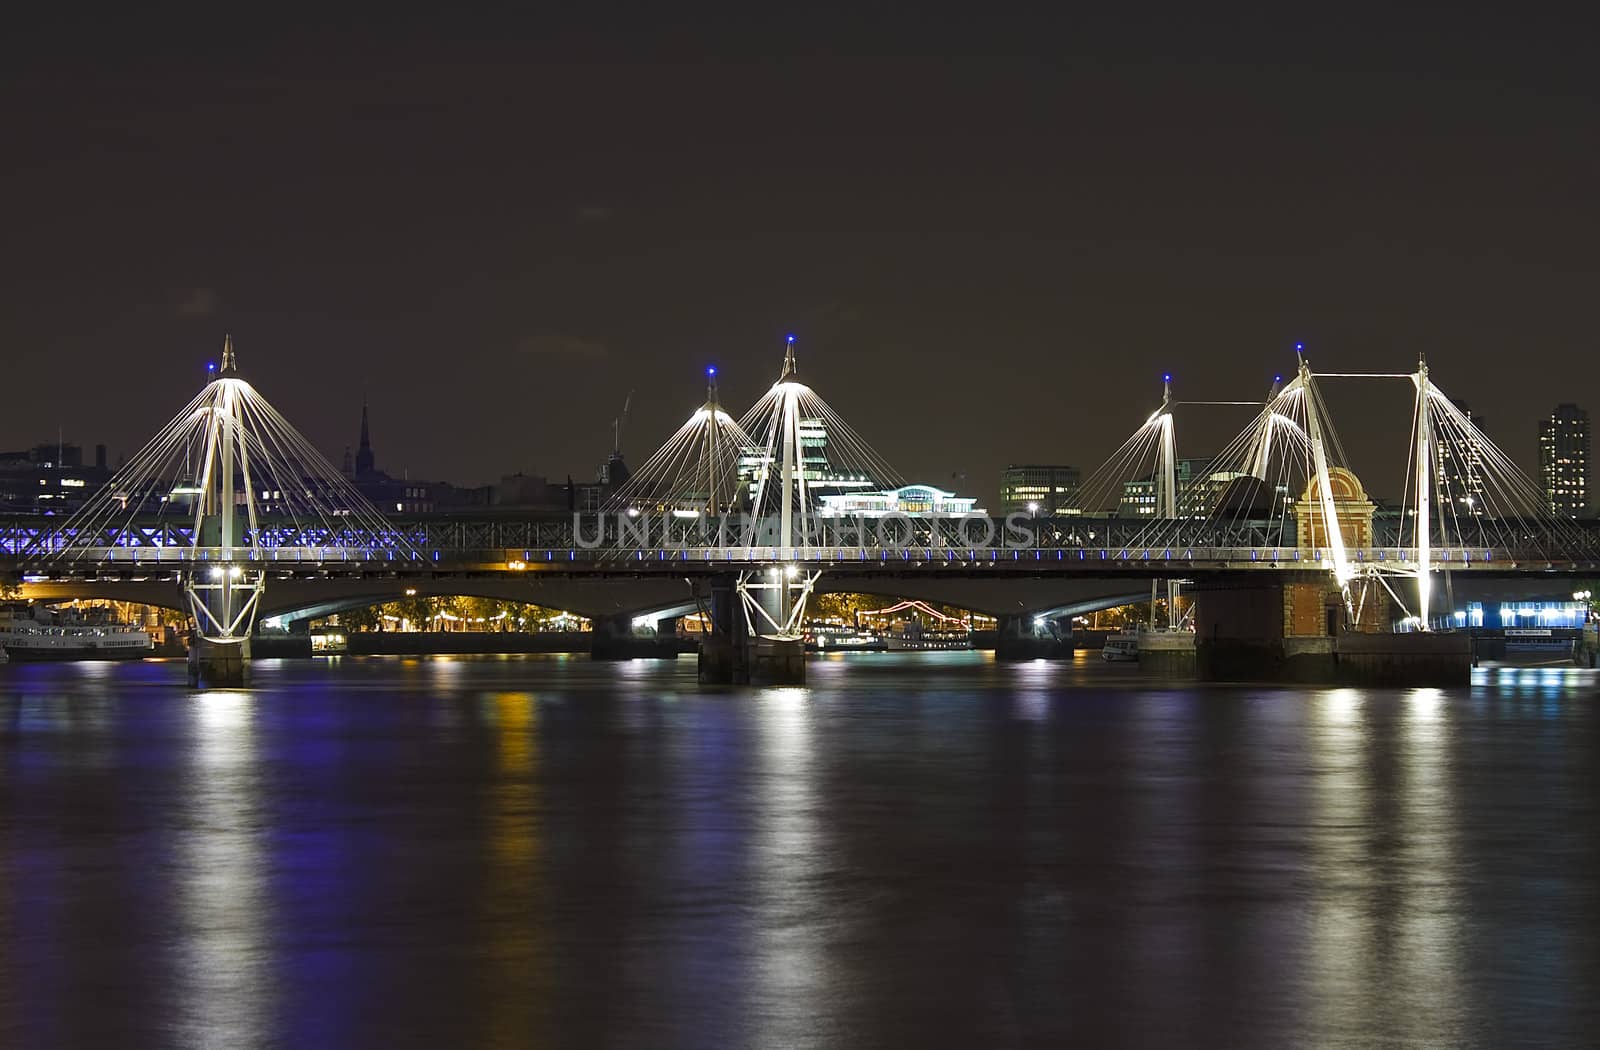 The Jubilee Bridge in London at night with reflection in the river Thames